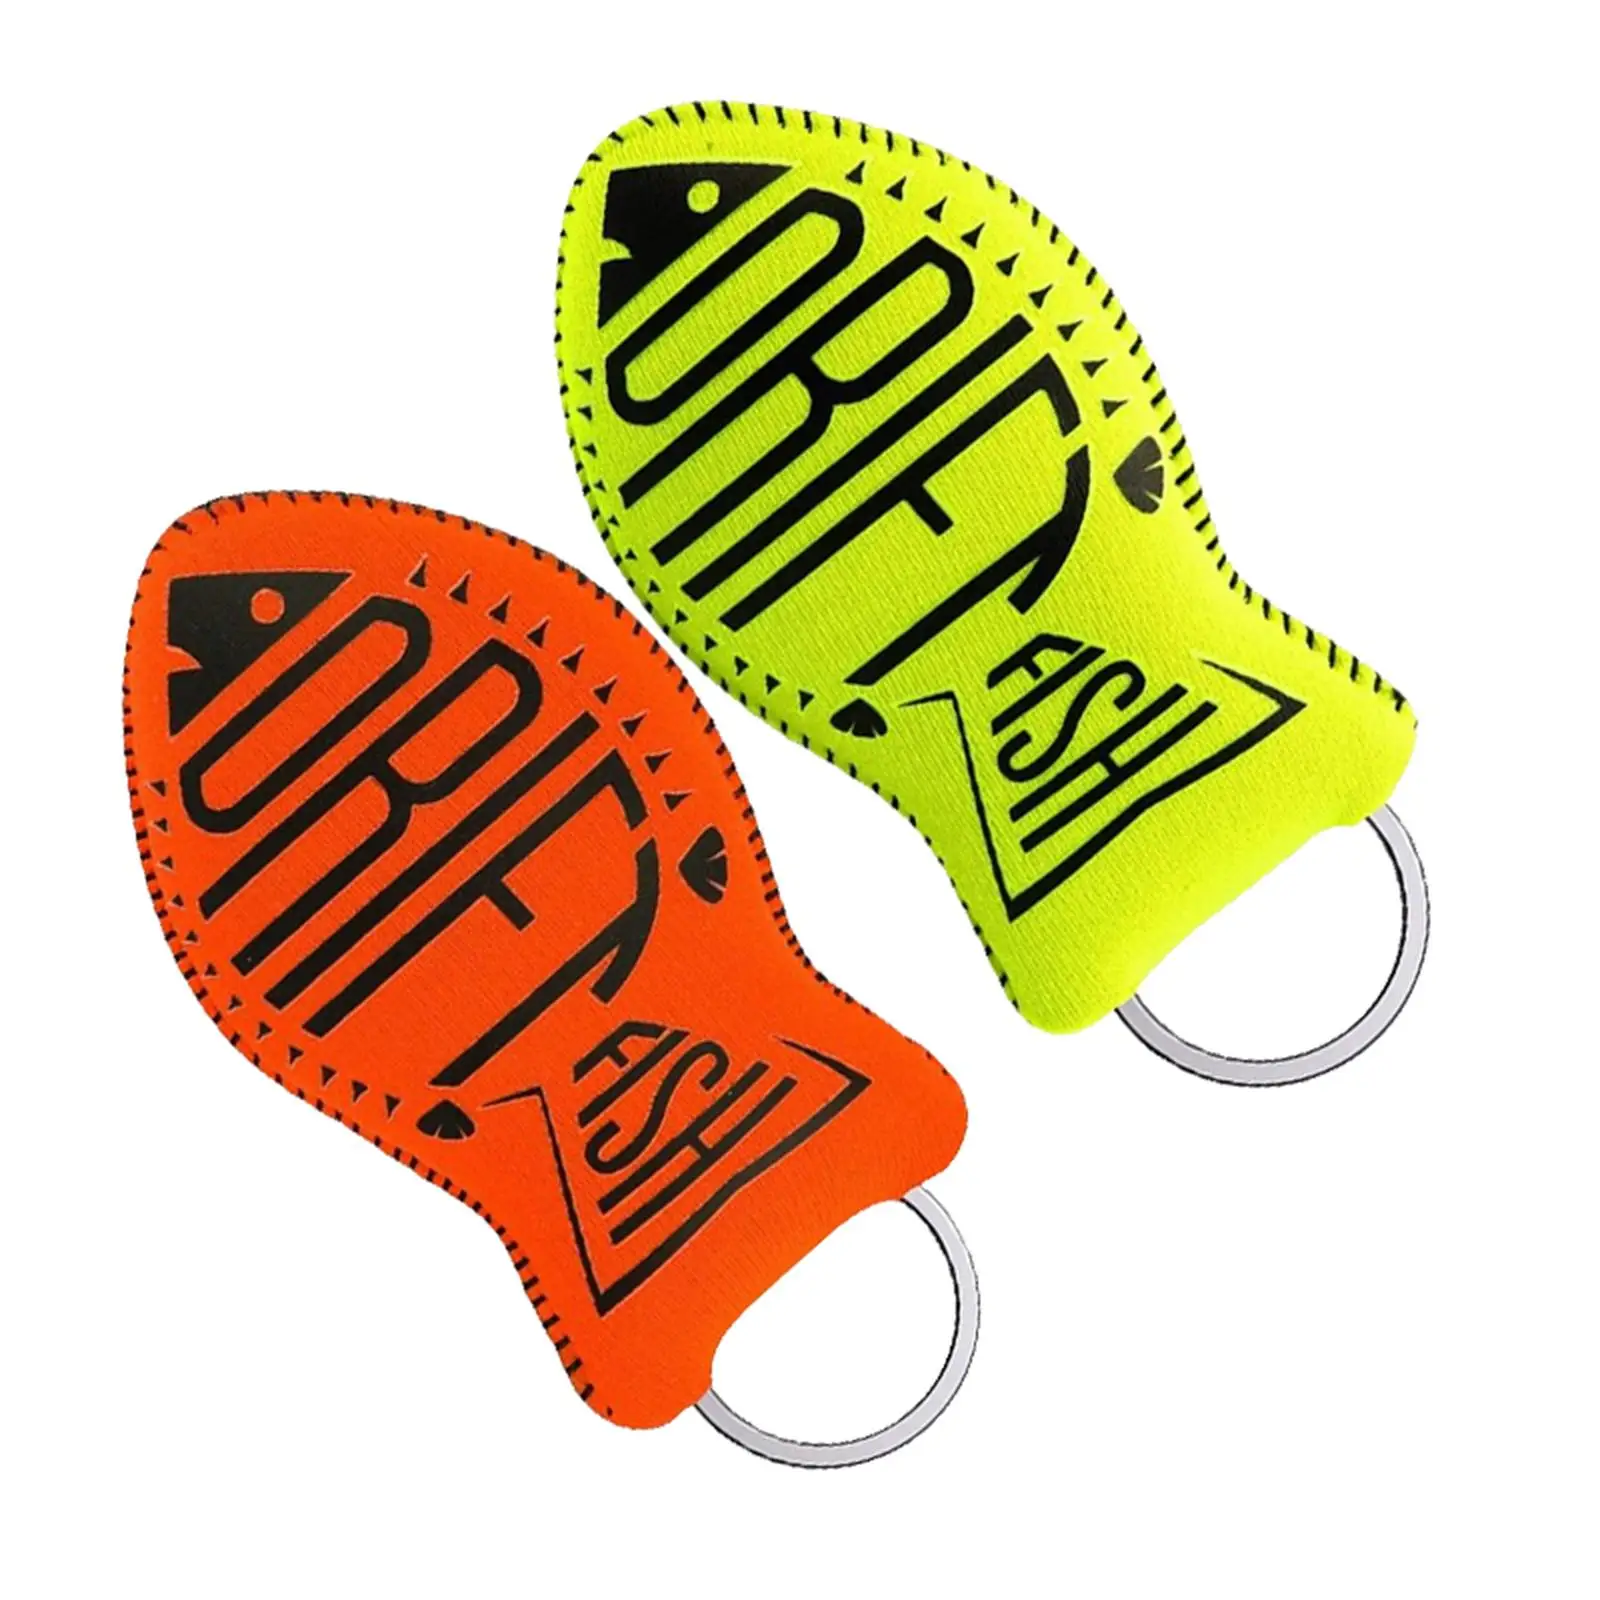 Floating Keychain Waterproof Water Sport Accessories Pendant Portable Glow in The darks key Chain for Outdoor Sports Fishing